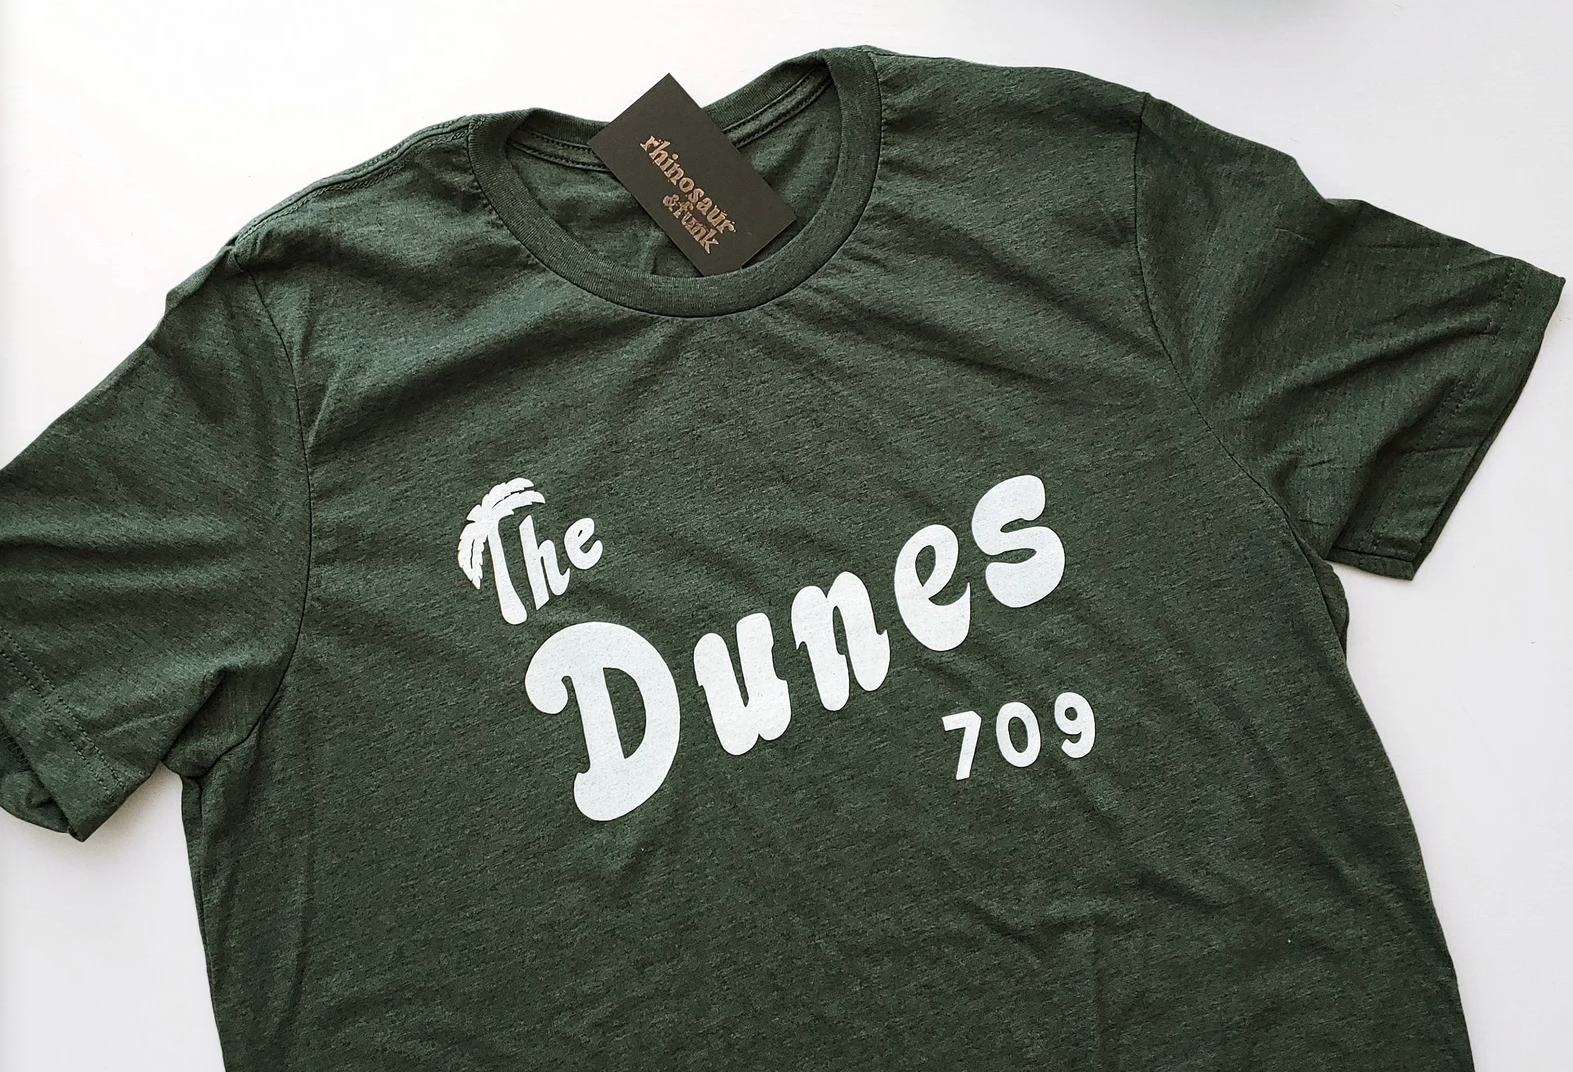 A soft green t shirt that has the Dunes 709 printed on the front in the same font as the building from the show